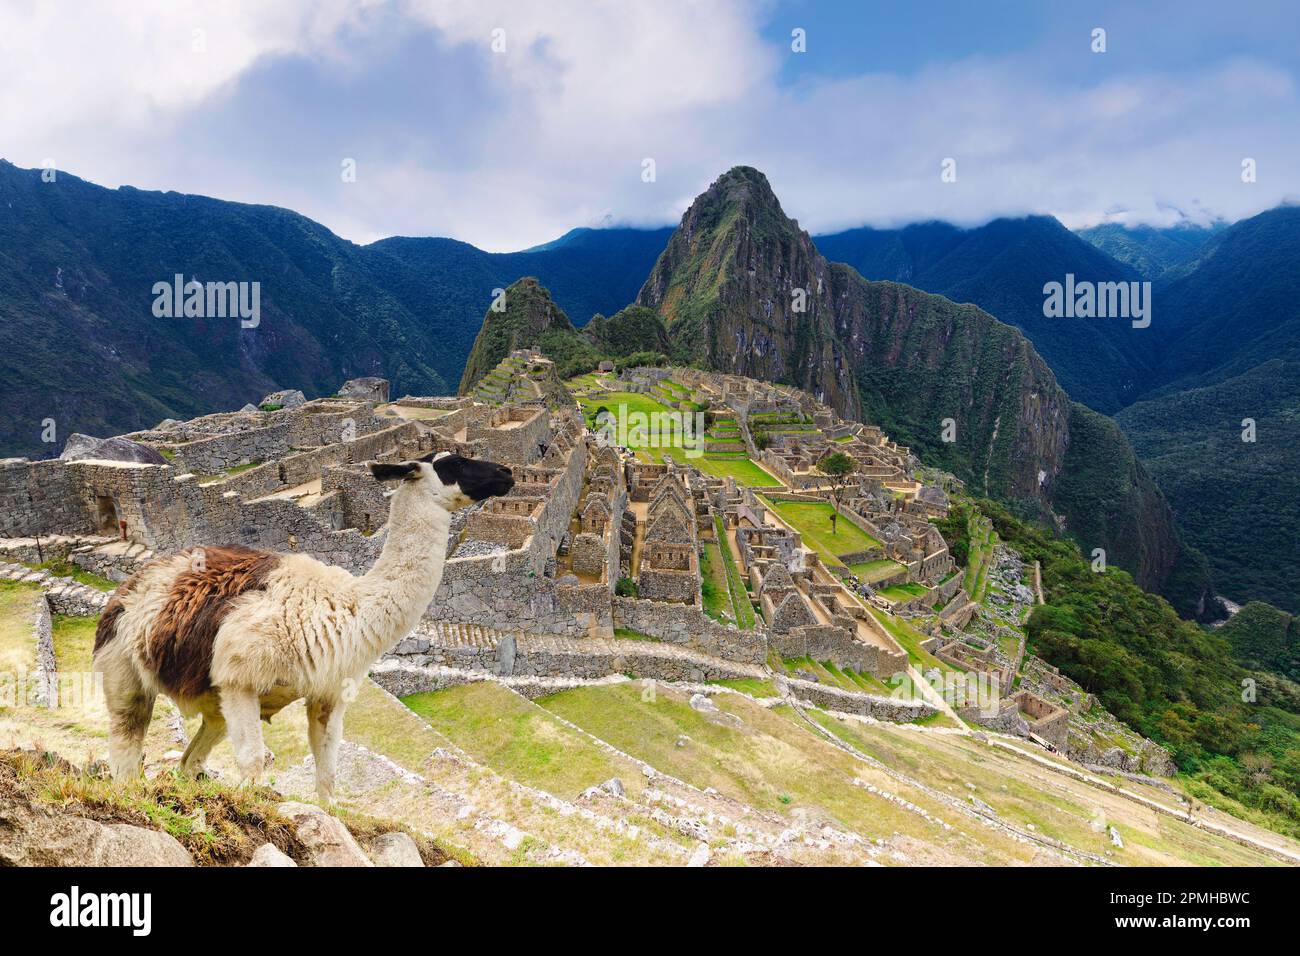 Machu Picchu, with llama in front of the ruined city of the Incas with Mount Huayana Picchu, Andes Cordillera, Urubamba province, Cusco, Peru Stock Photo